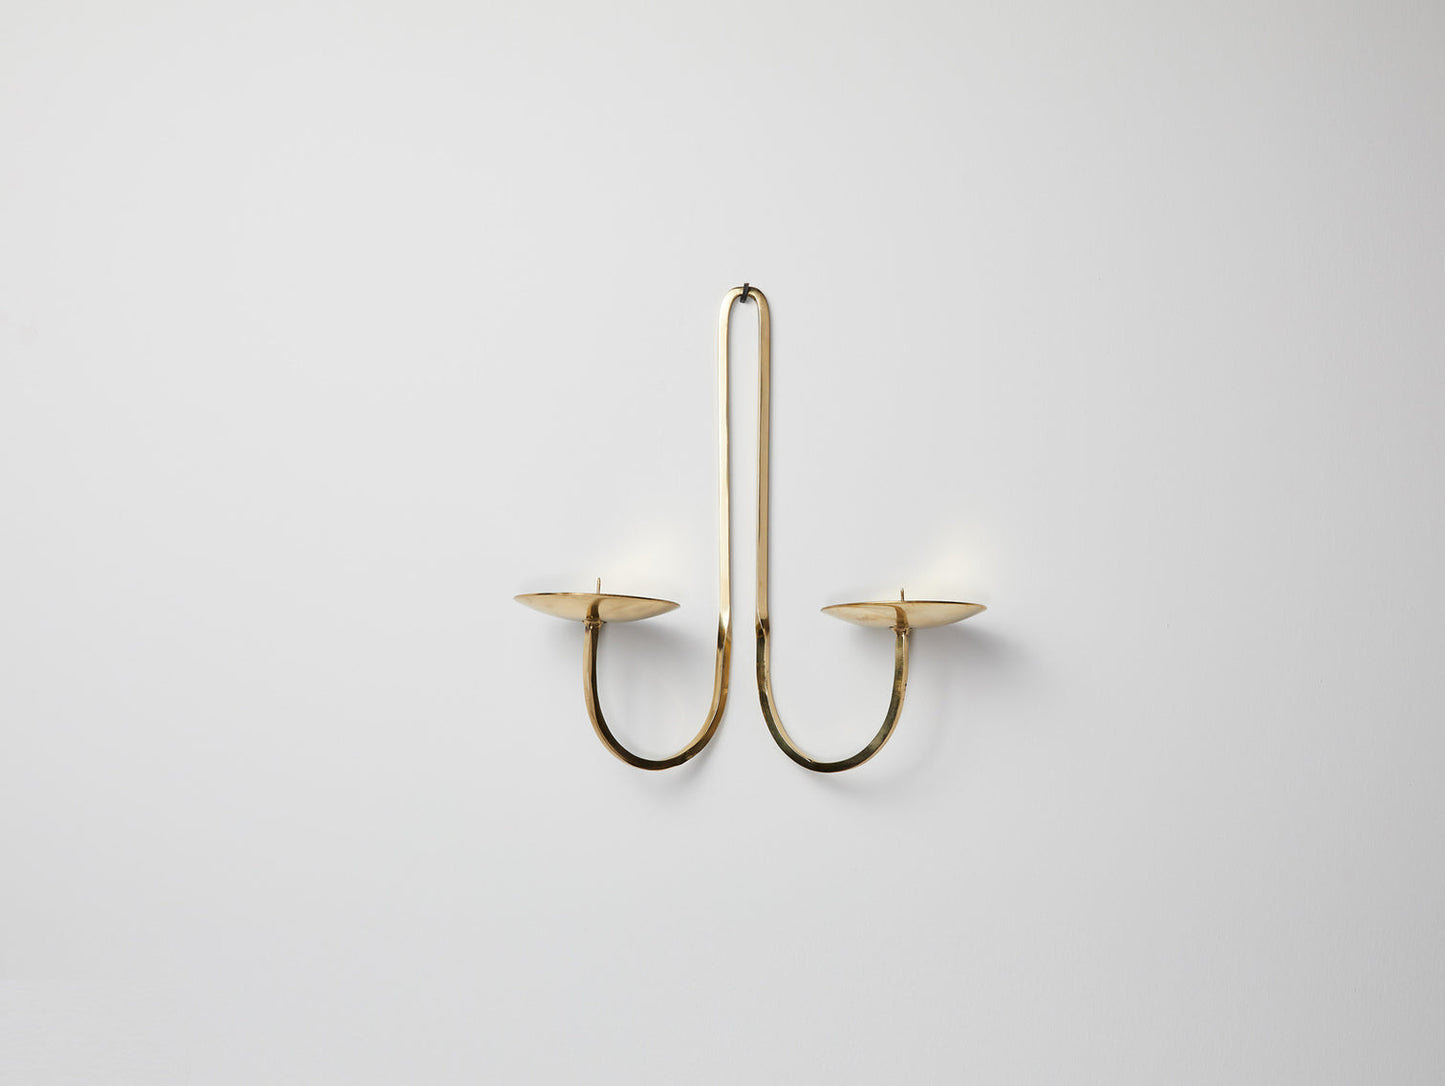 Two Arm Candle Holder - Brass